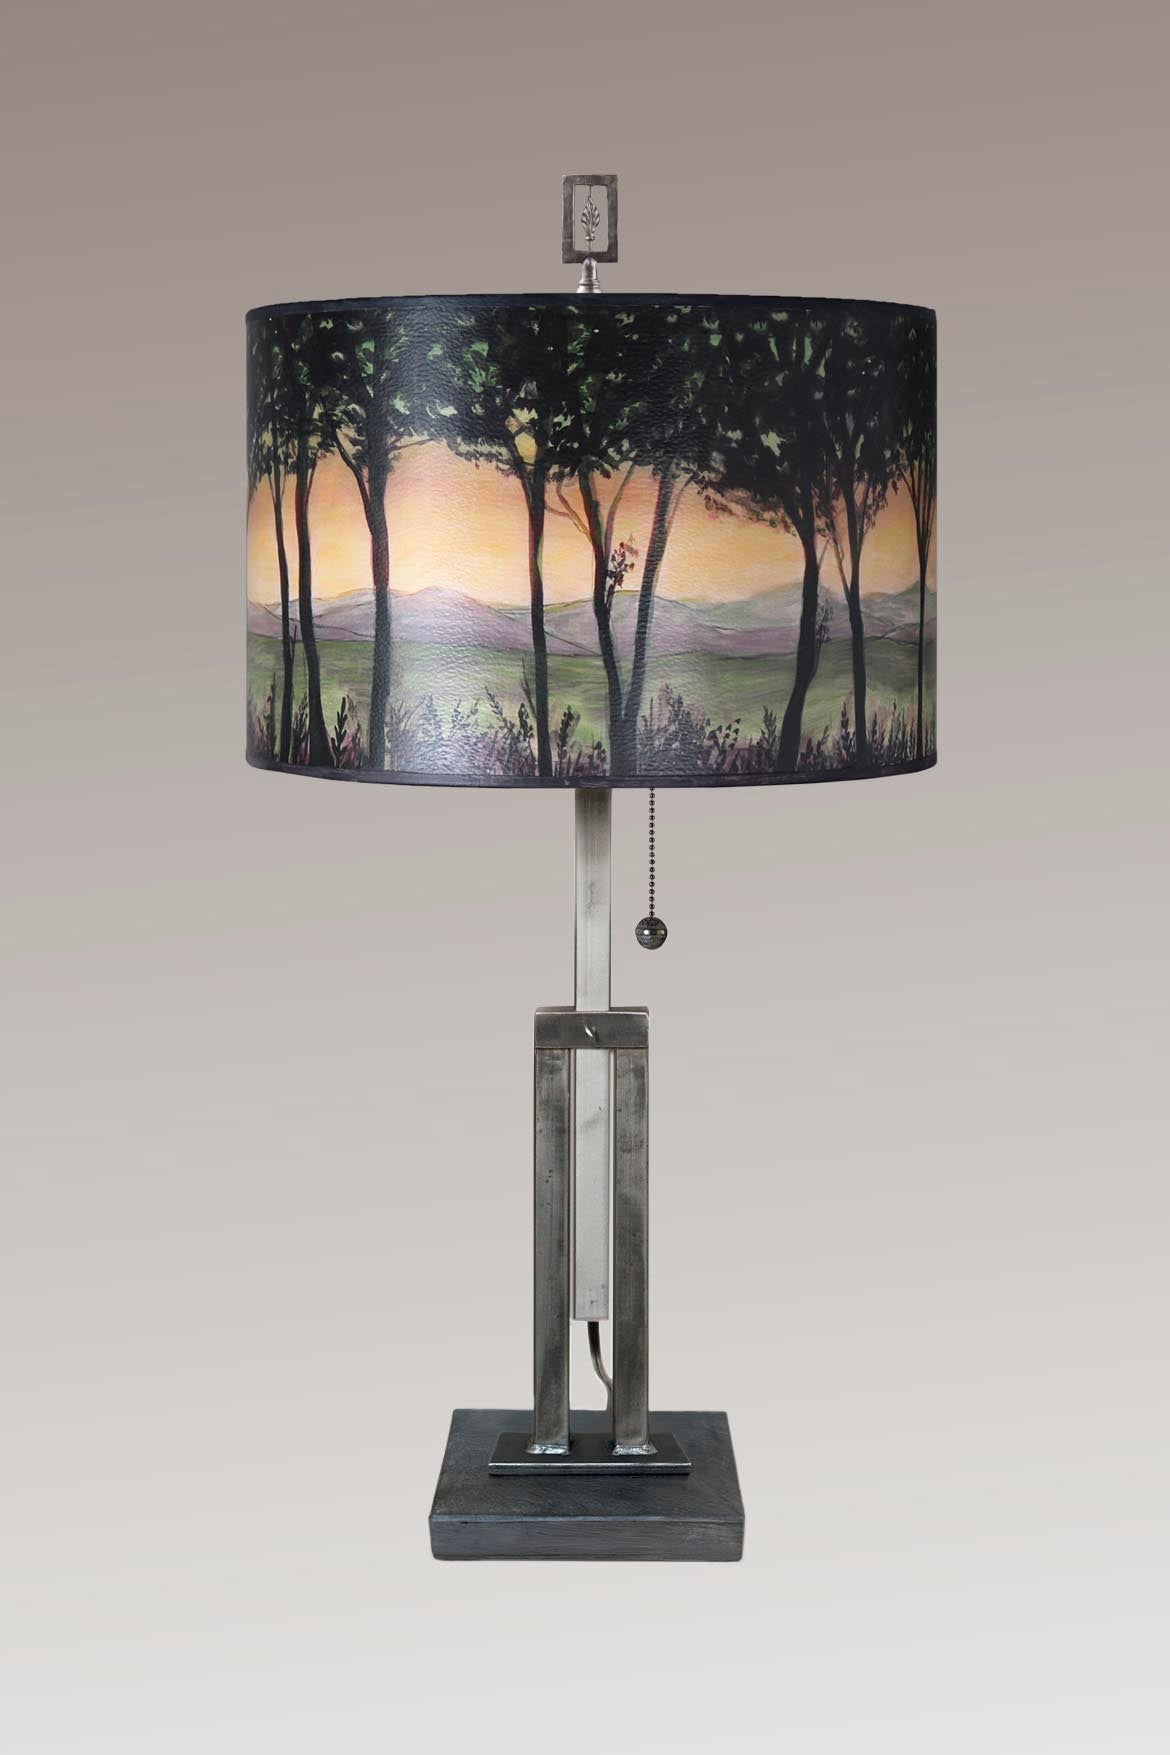 Janna Ugone &amp; Co Table Lamp Adjustable-Height Steel Table Lamp with Large Drum Shade in Dawn